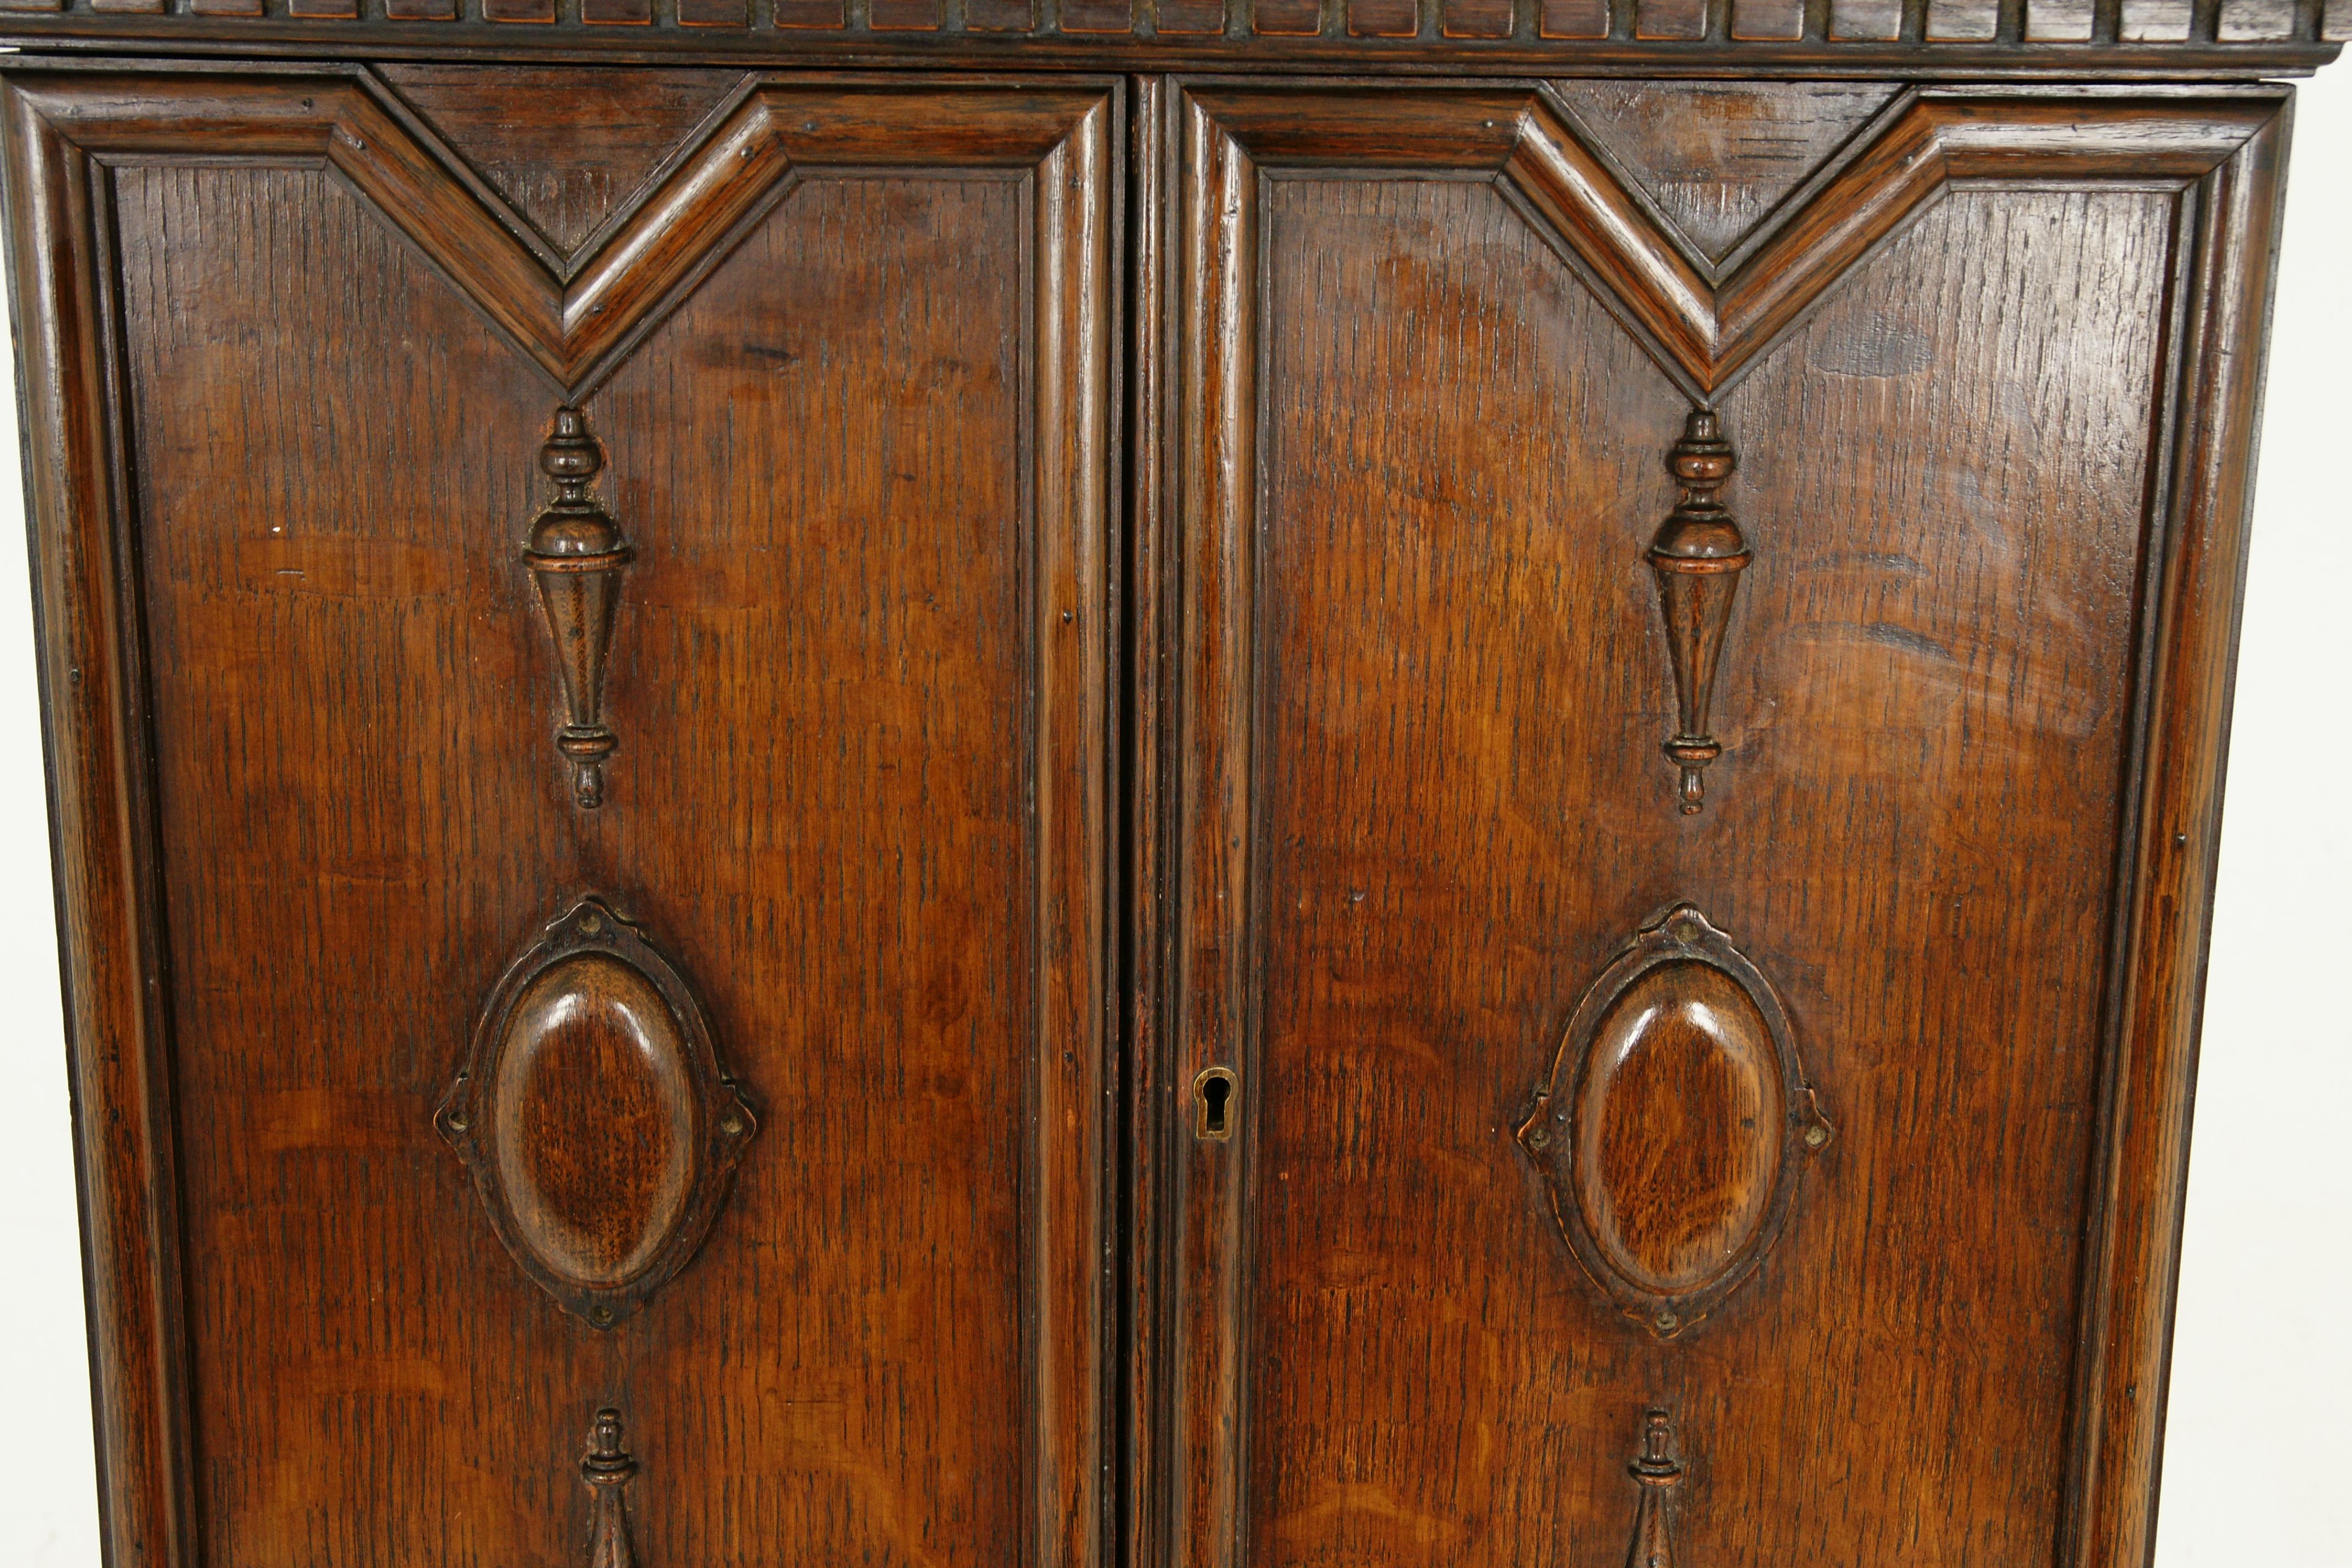 Antique smokers cabinet, carved tiger oak, humidor, pipe rack, Scotland 1910, B2385

Scotland, 1910
Solid oak
Original finish
Rectangular moulded top
Shaped pediment to the top back
Geometrical paneled doors
Opens to reveal a pair of fixed